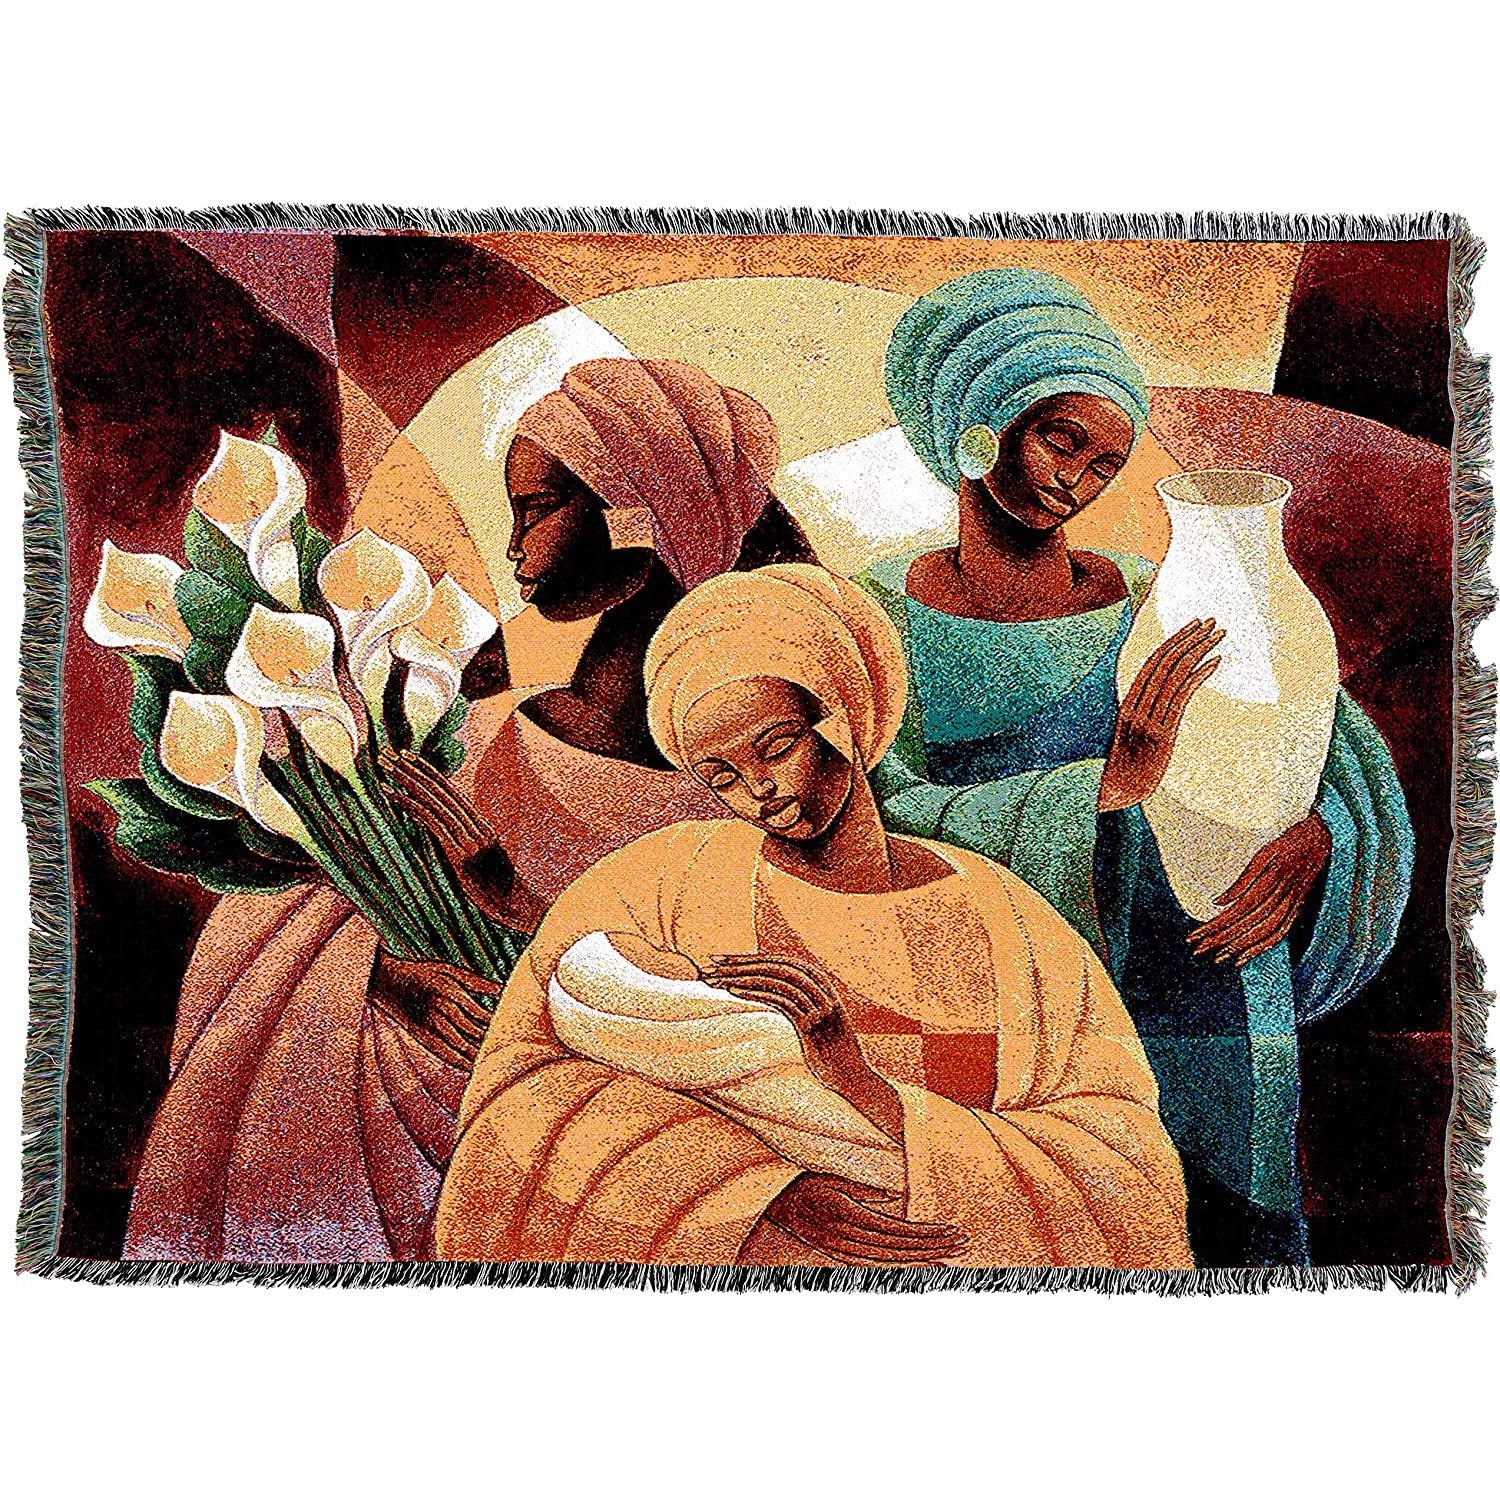 3 of 3: Caress by Keith Mallett: African American Tapestry Throw Blanket